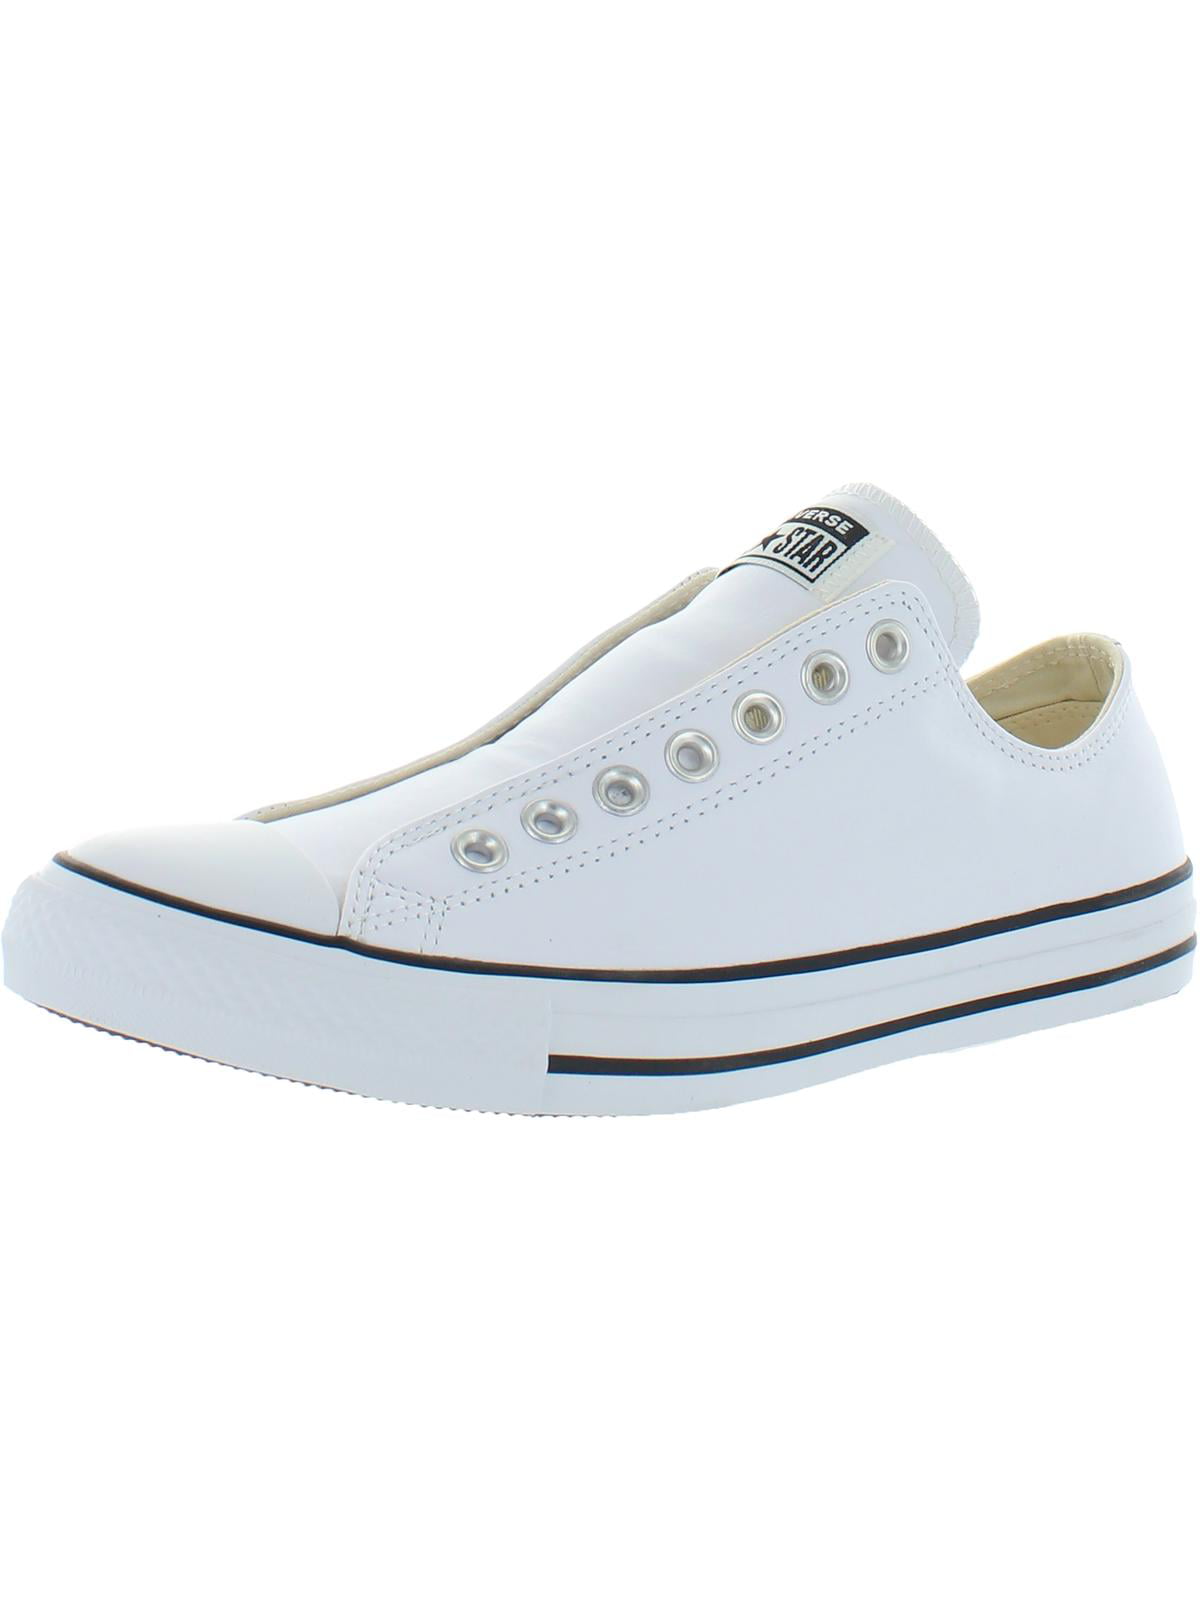 Converse Mens All Star Leather Slip Canvas Laceless Fashion Sneakers -  